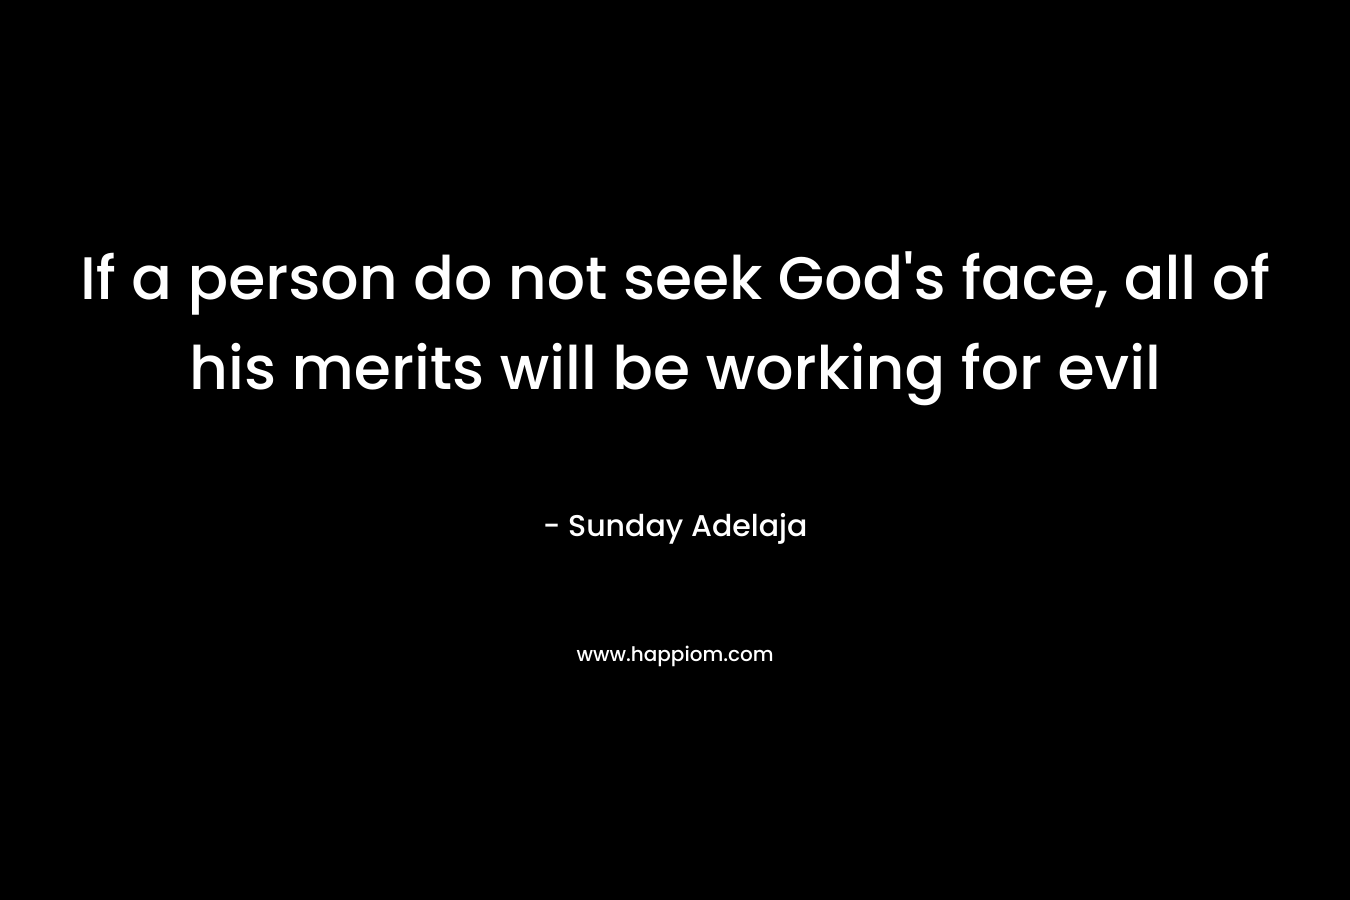 If a person do not seek God's face, all of his merits will be working for evil